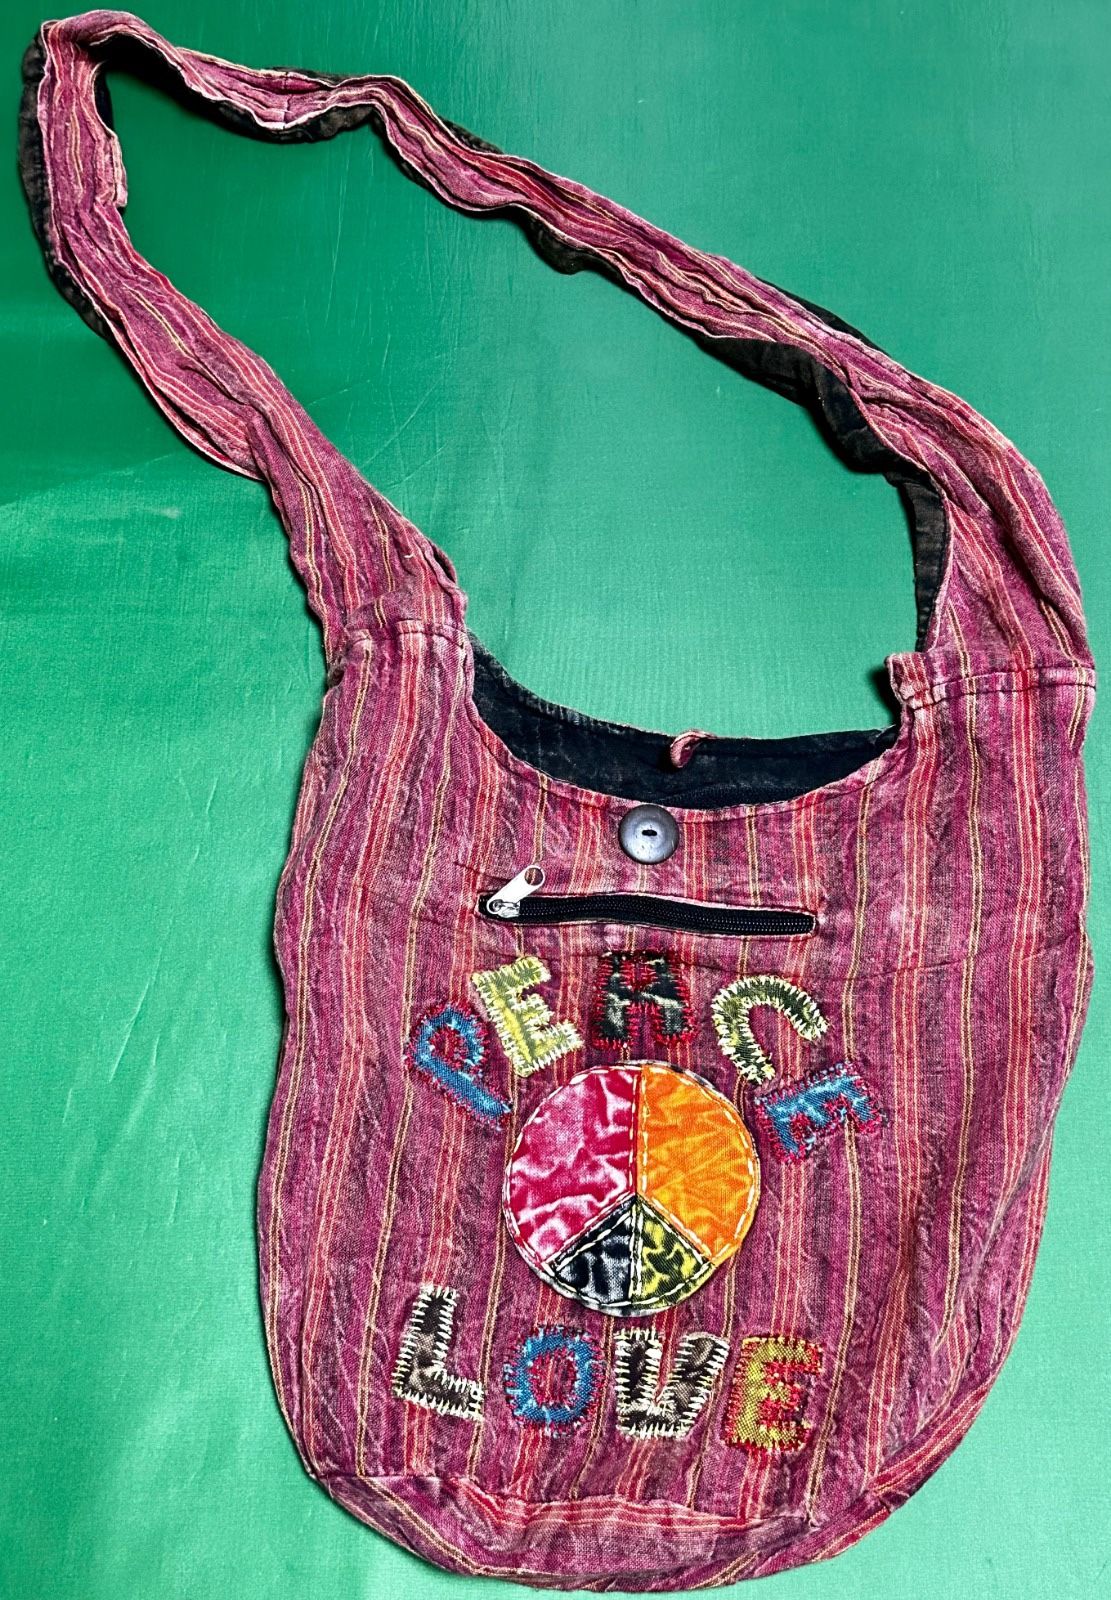 Crossbody Hippie, Purse, Handbag, And Backpack Made In Nepal Piece Sign Pr